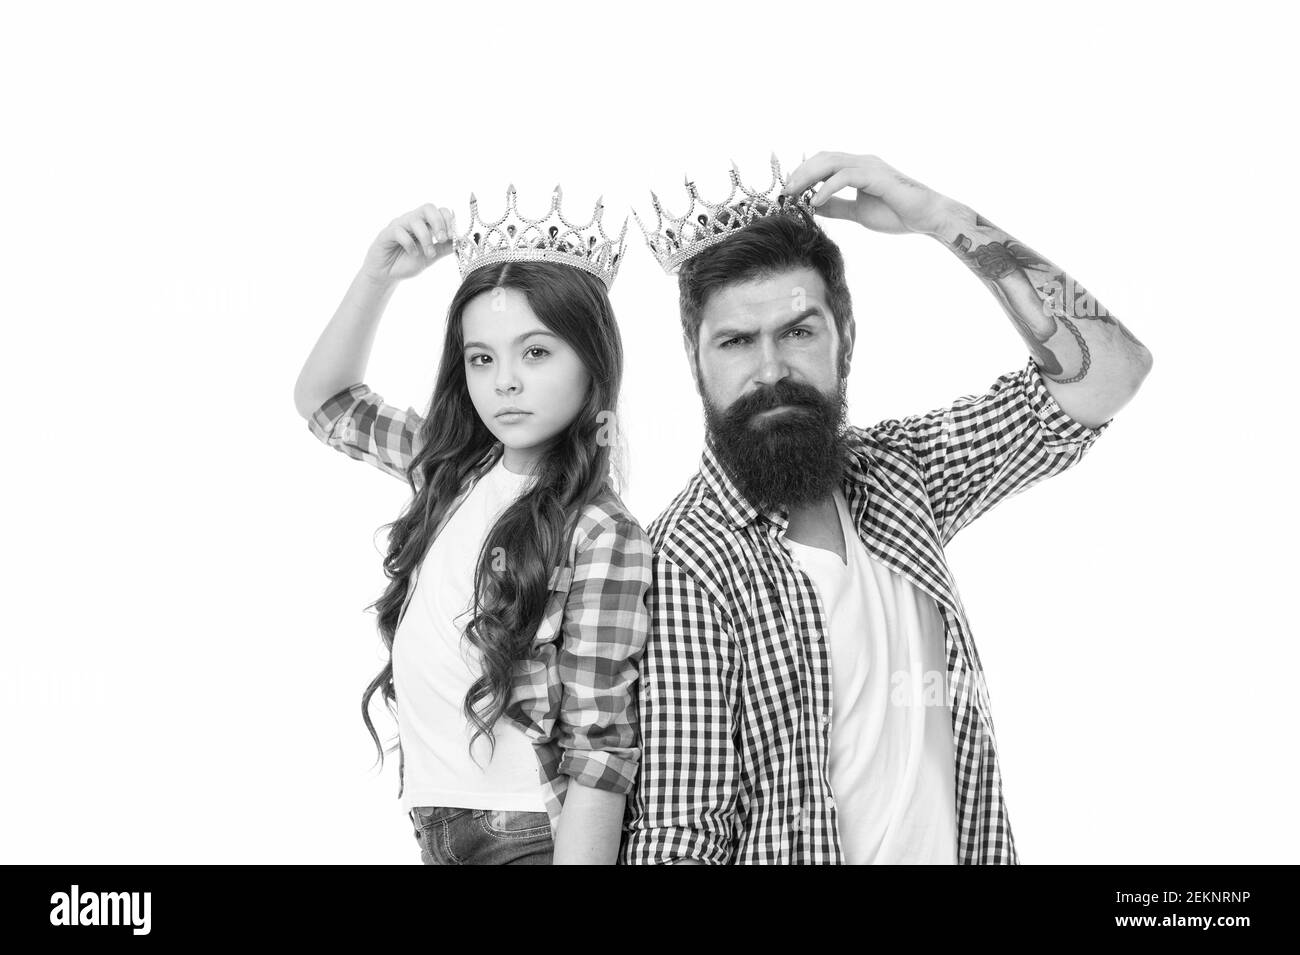 Are you going to prom. Prom king and young queen. Small child and bearded man hold prom crowns. Coronation party. Holiday celebration. Pride and glory. Prestige and fame. Ready for prom night. Stock Photo